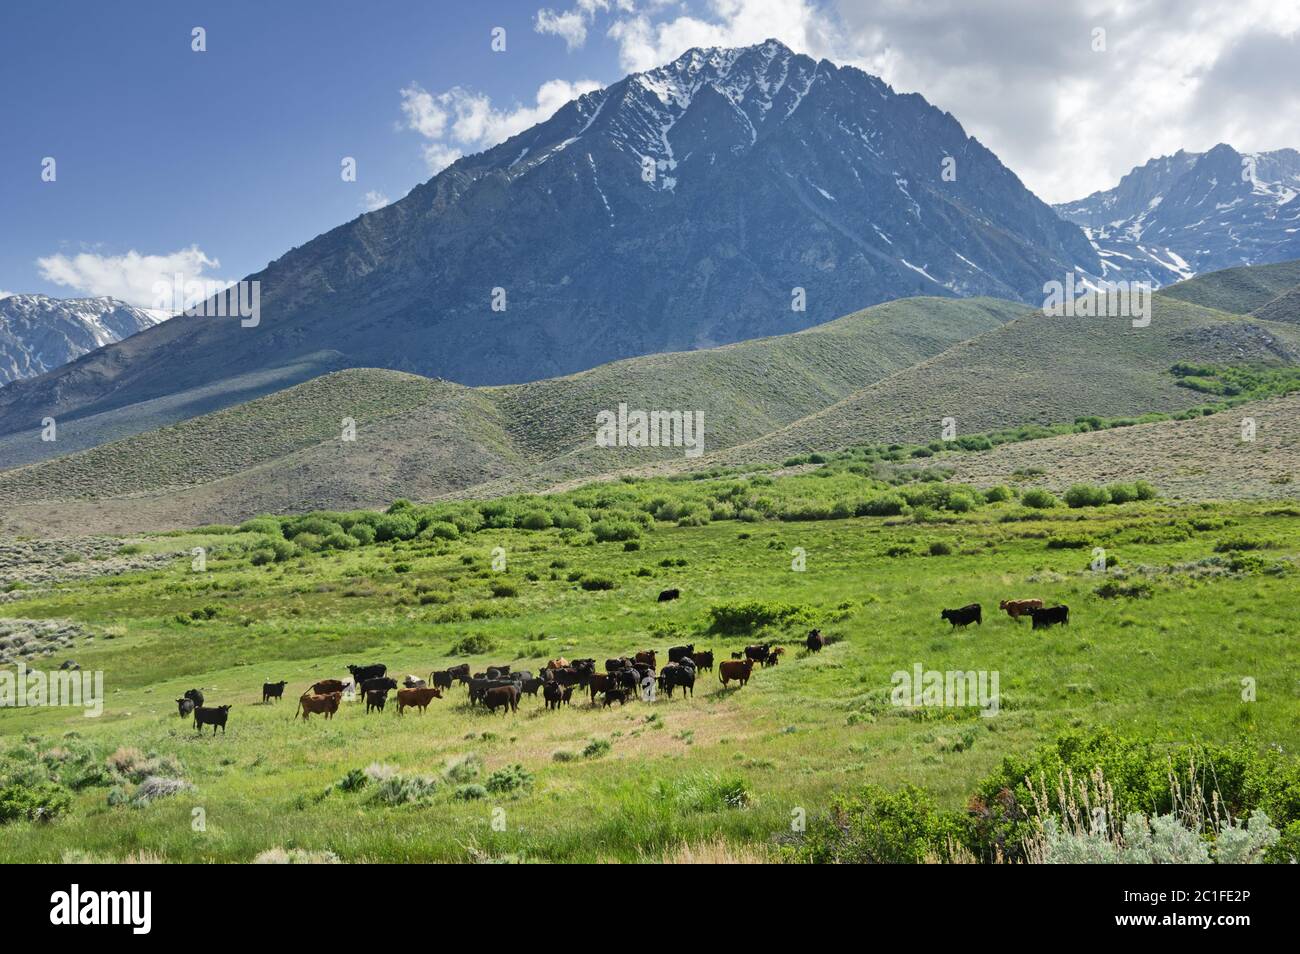 a herd of cattle in McMurray Meadow below Mount Tinemaha in California Stock Photo